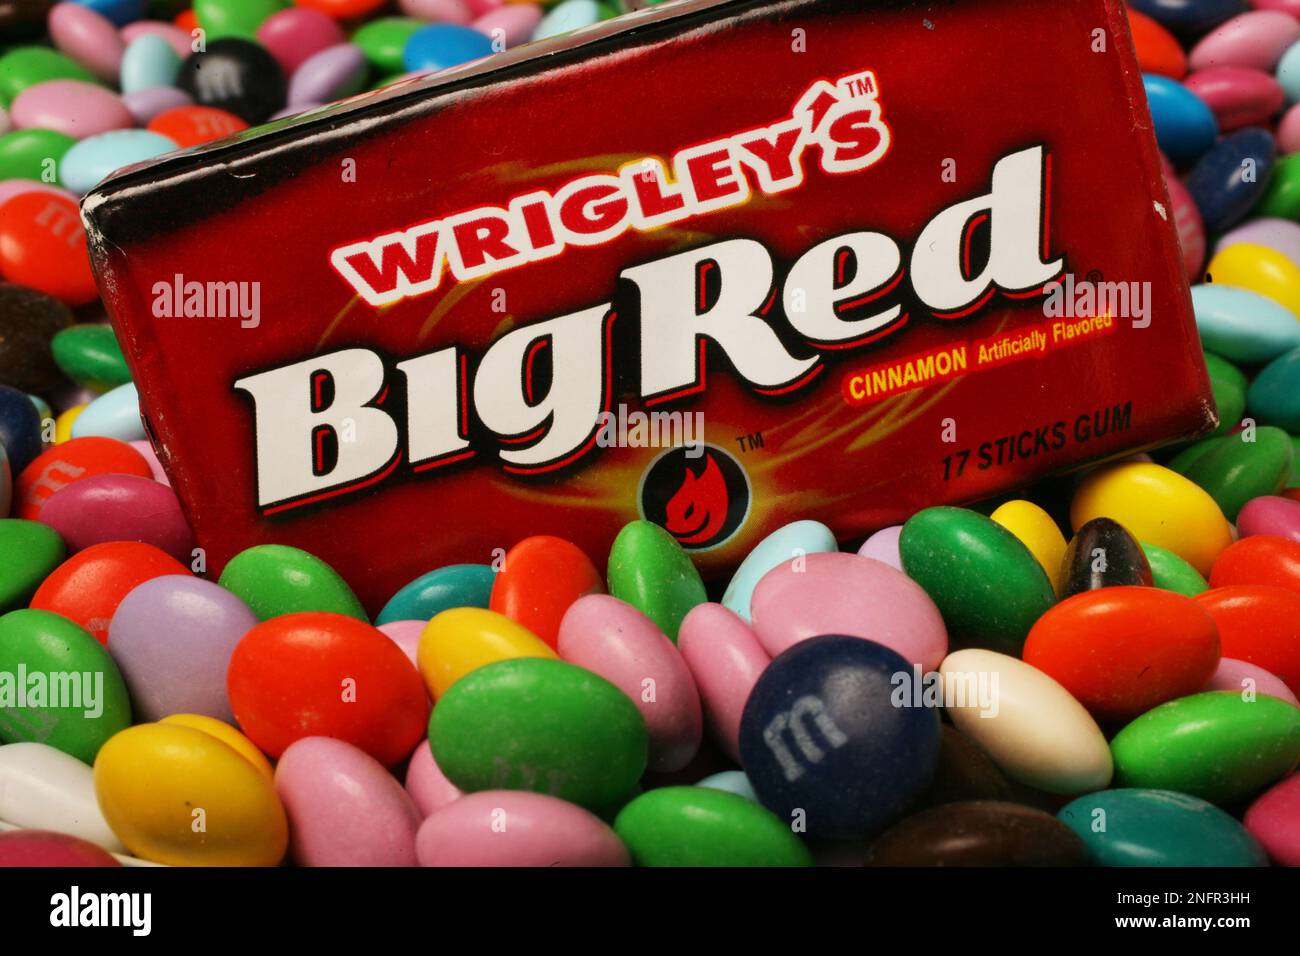 Wrigley's Big Red chewing gum is shown with M&M's on Monday, April 28, 2008 in New York. Mars Inc., maker of M&M's, and Warren Buffett's Berkshire Hathaway Inc., were close to a deal to acquire the Wm. Wrigley Jr. Company for more than $22 billion, a deal that could transform the confectionary industry. (AP Photo/Mark Lennihan) Stock Photo